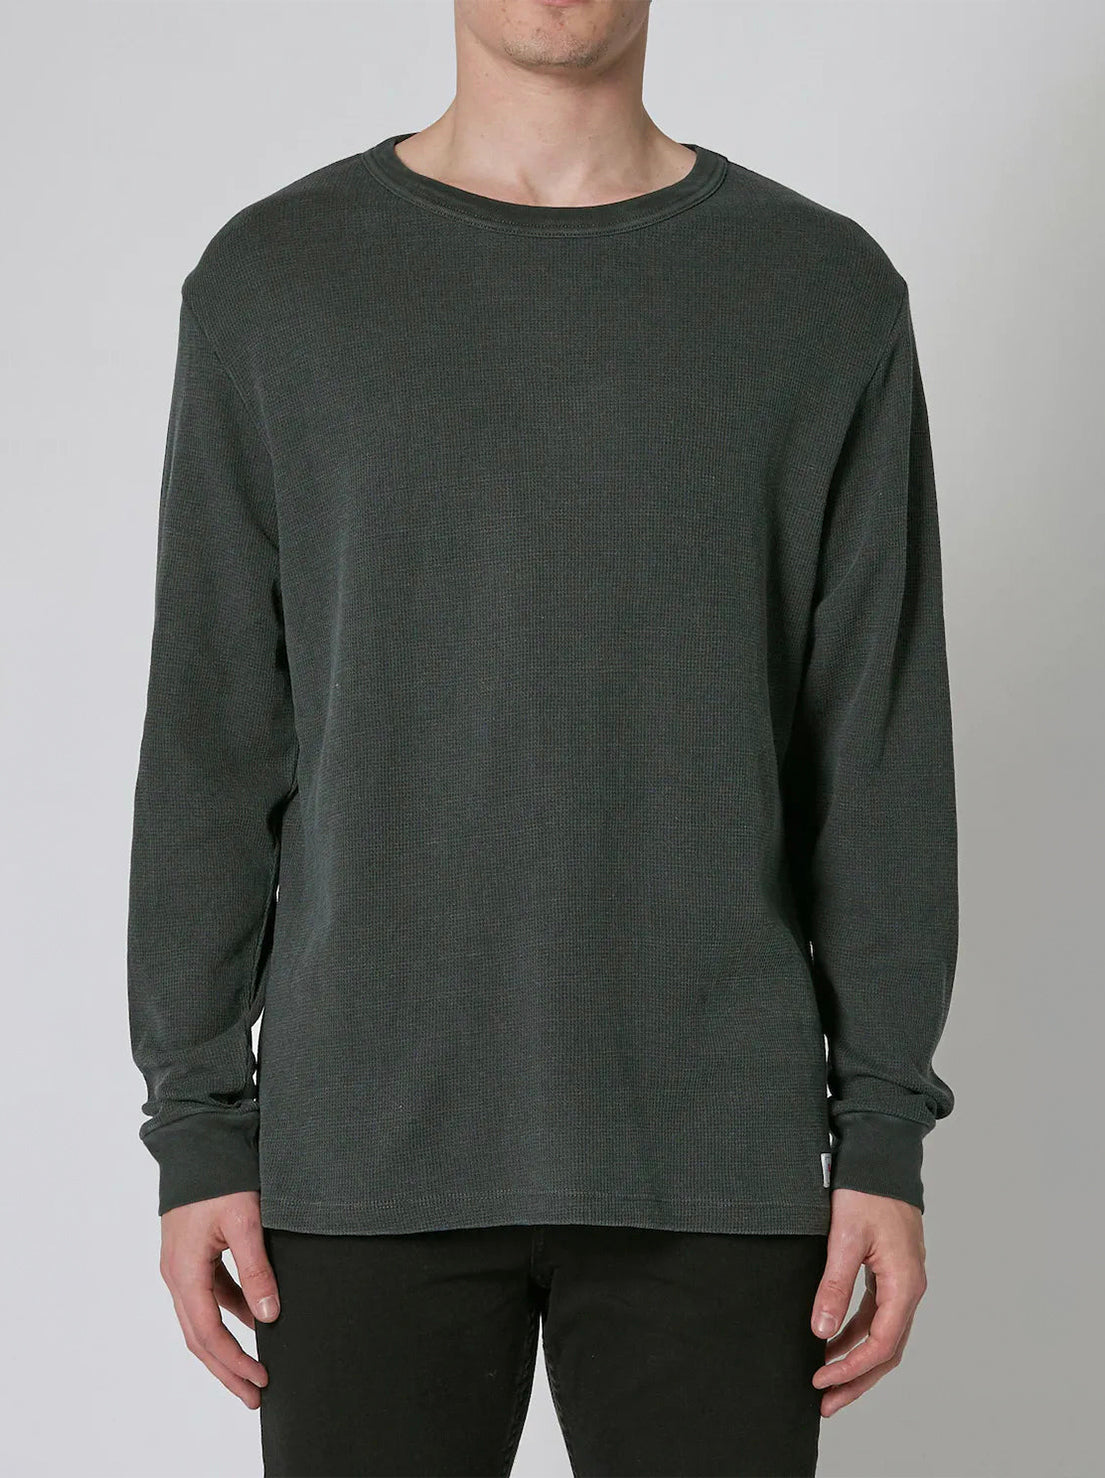 Rolla's - Trade Waffle L/S Tee - Thyme